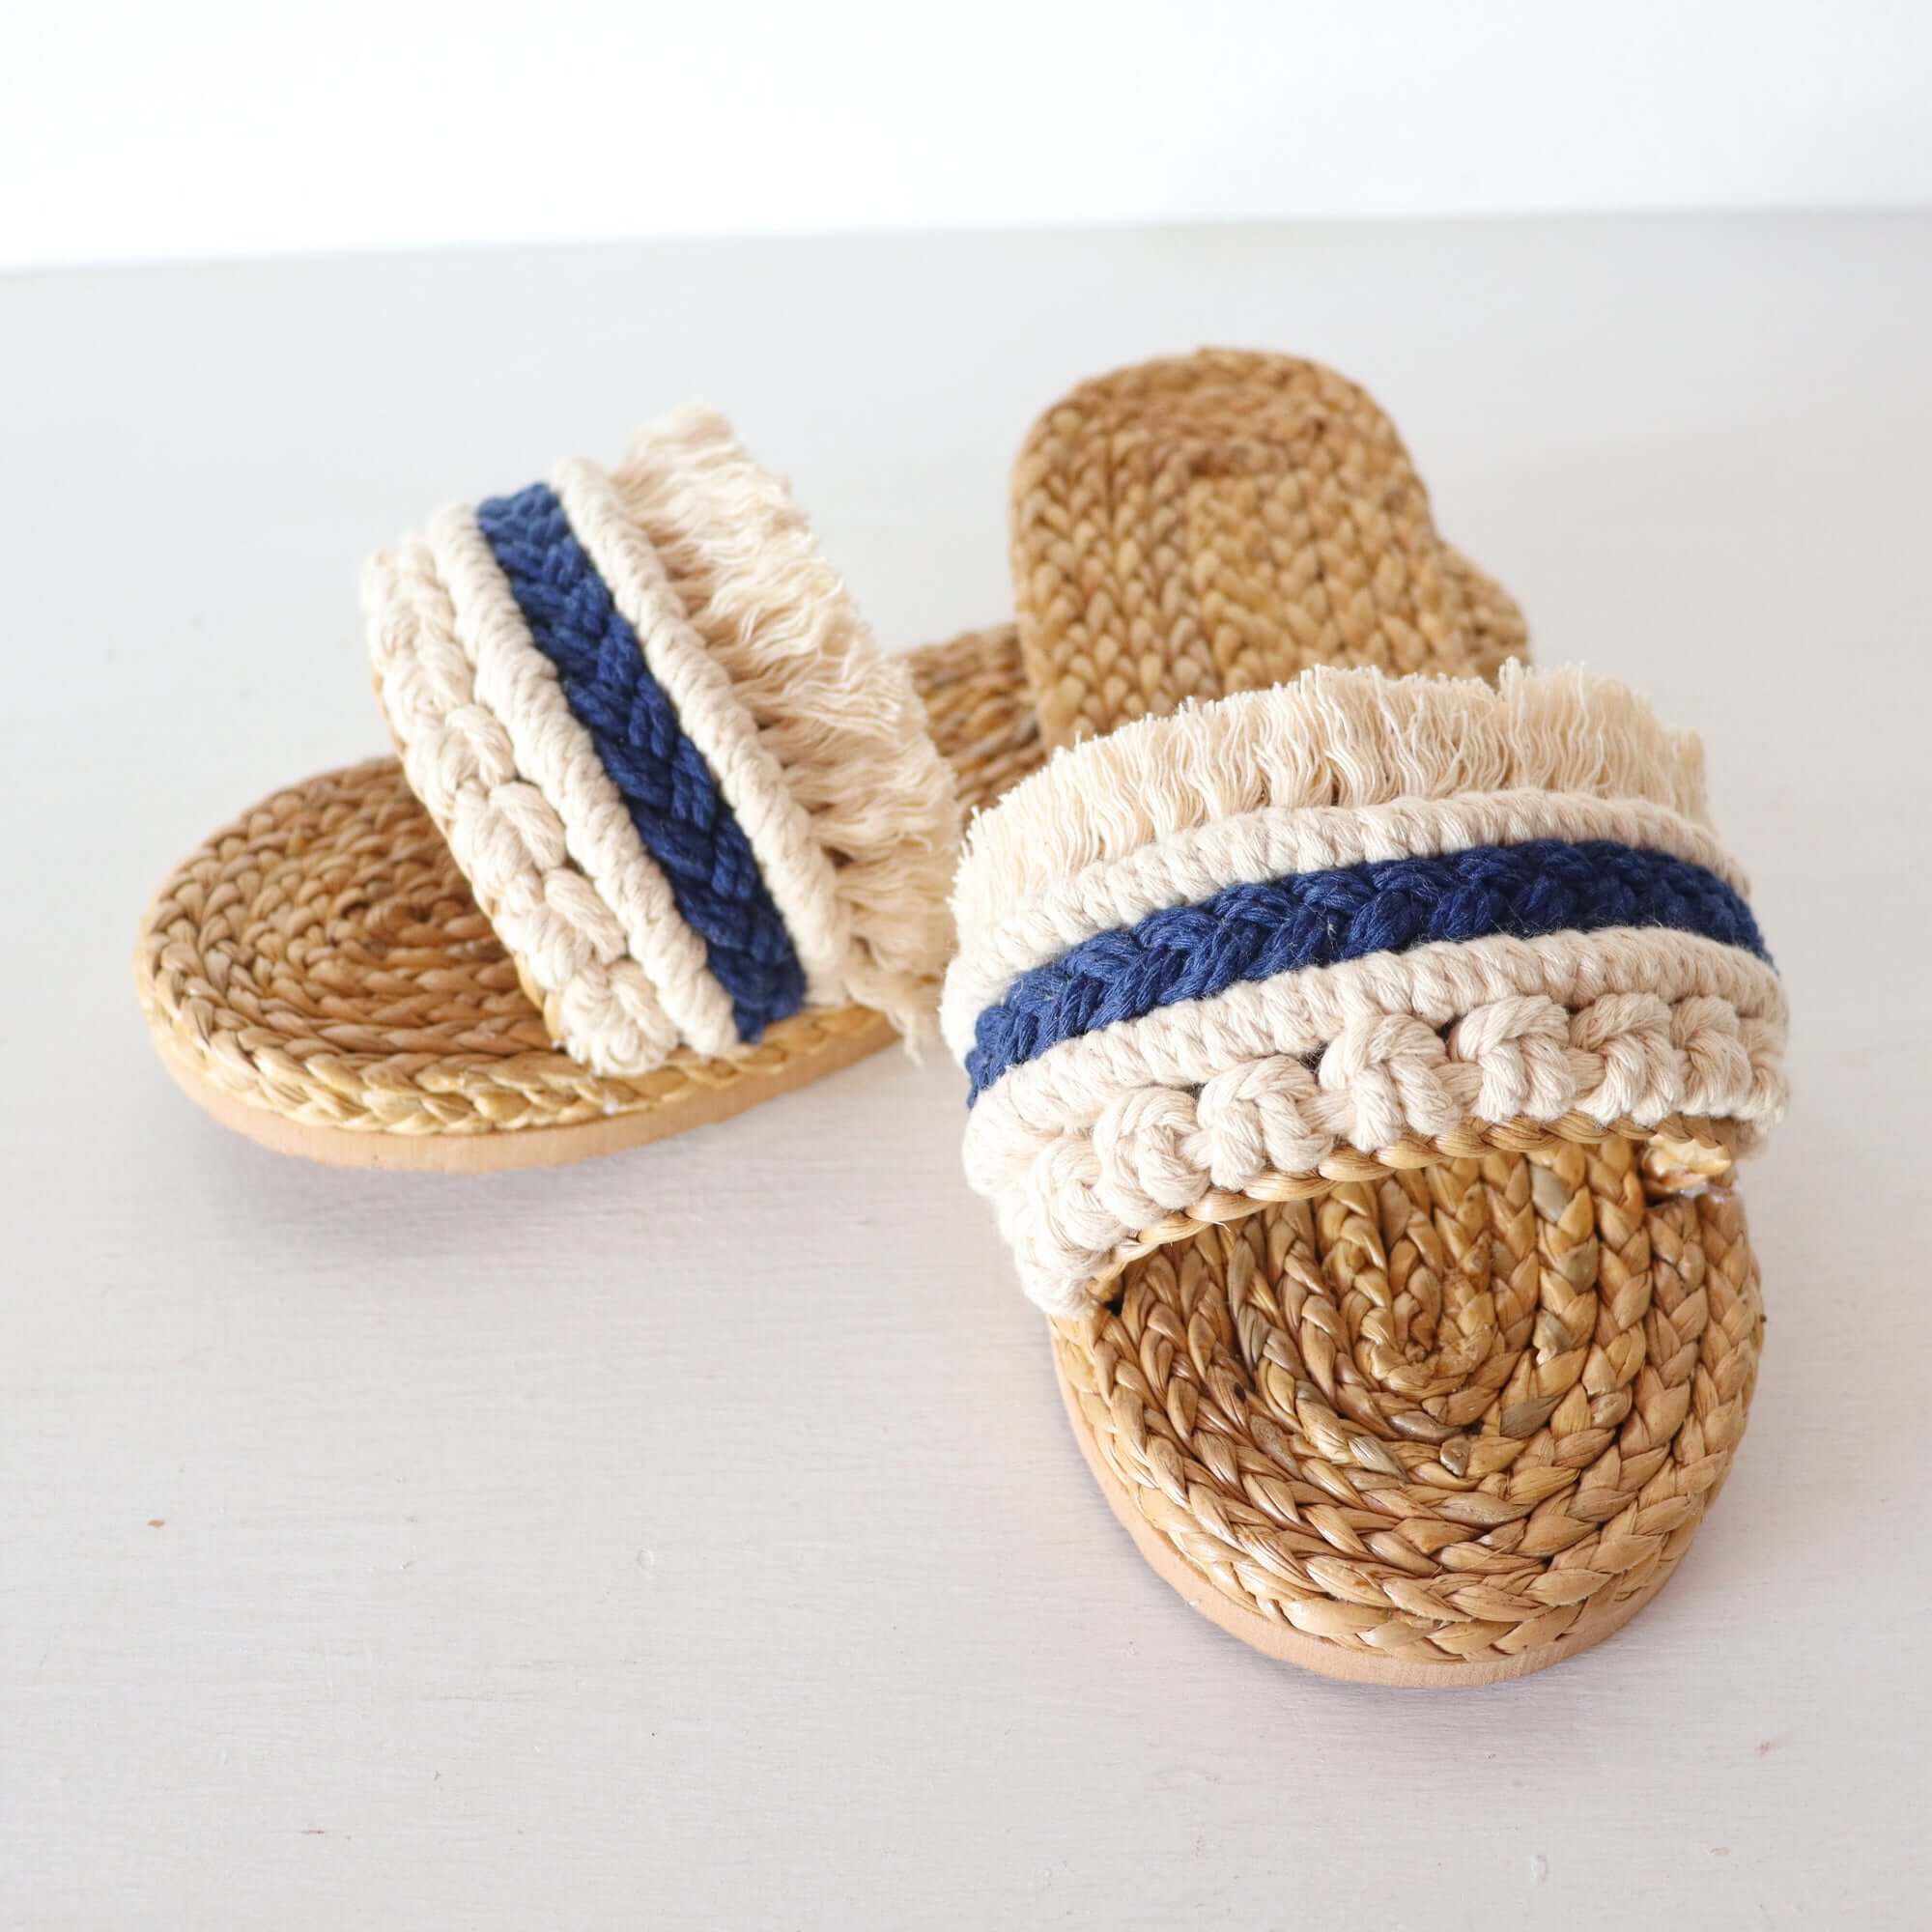 Macramé Straw Slippers - White and Blue